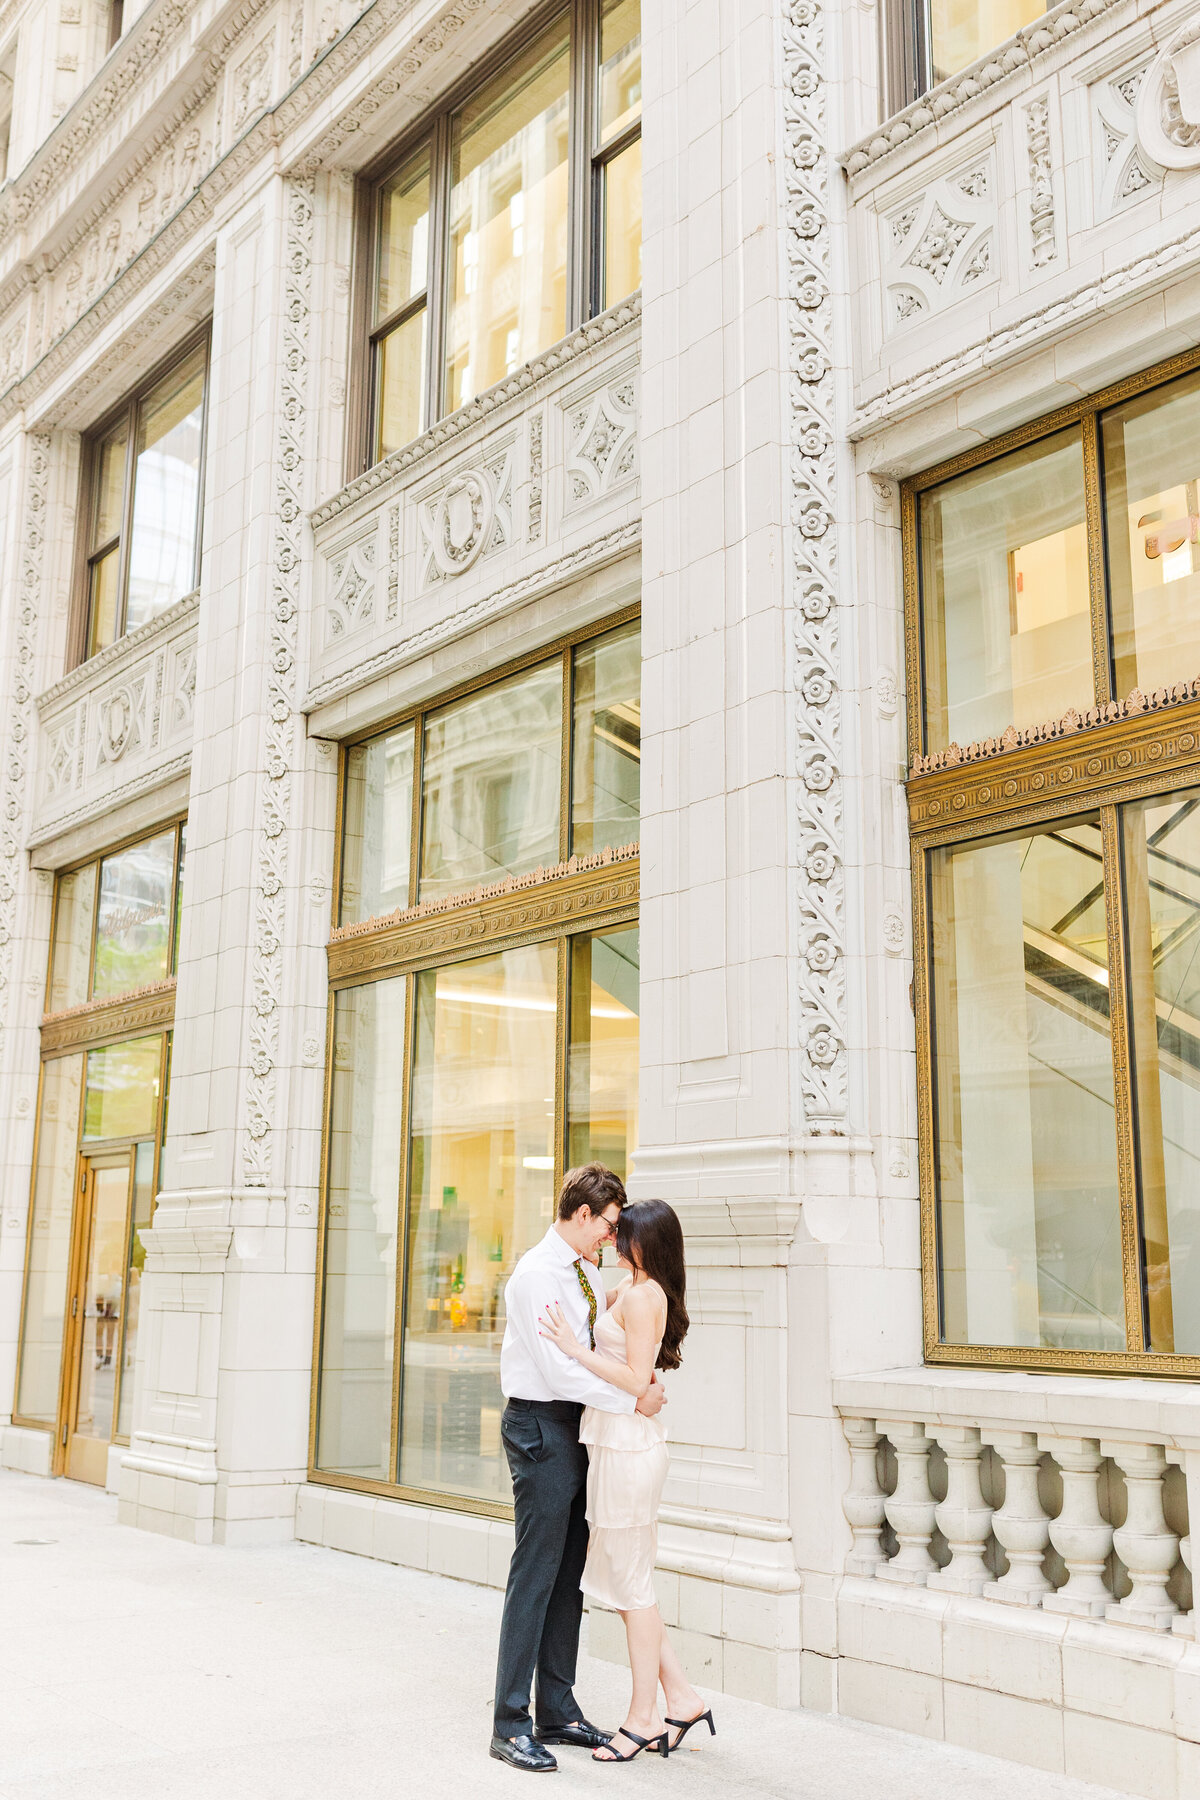 man and woman dressed up embracing in front of a building